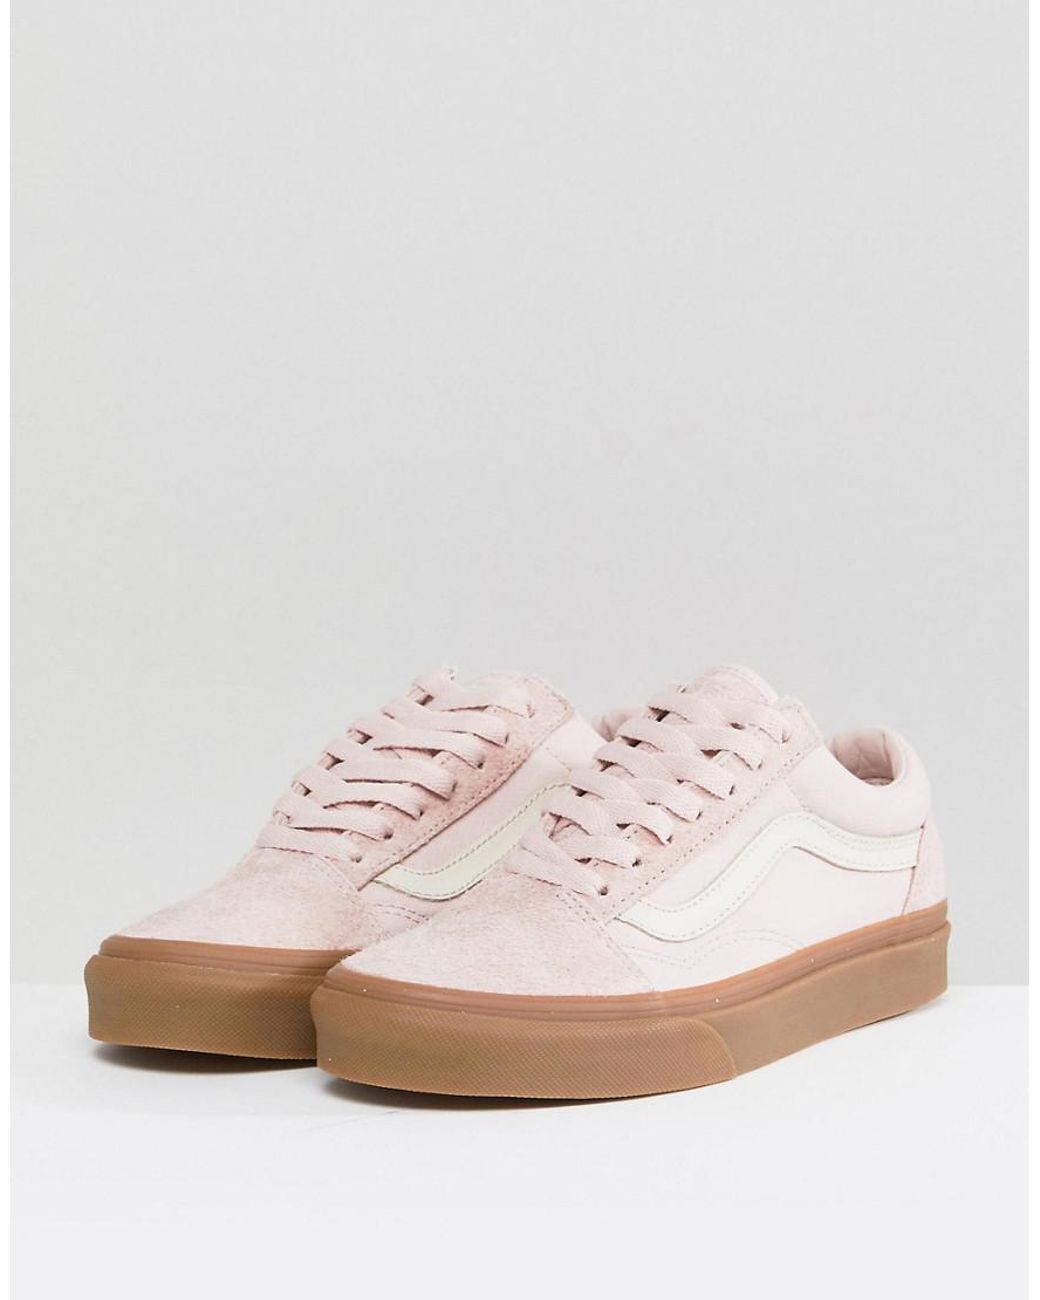 Vans Old Skool Trainers In Pink Fuzzy Suede With Gum Sole | Lyst Australia